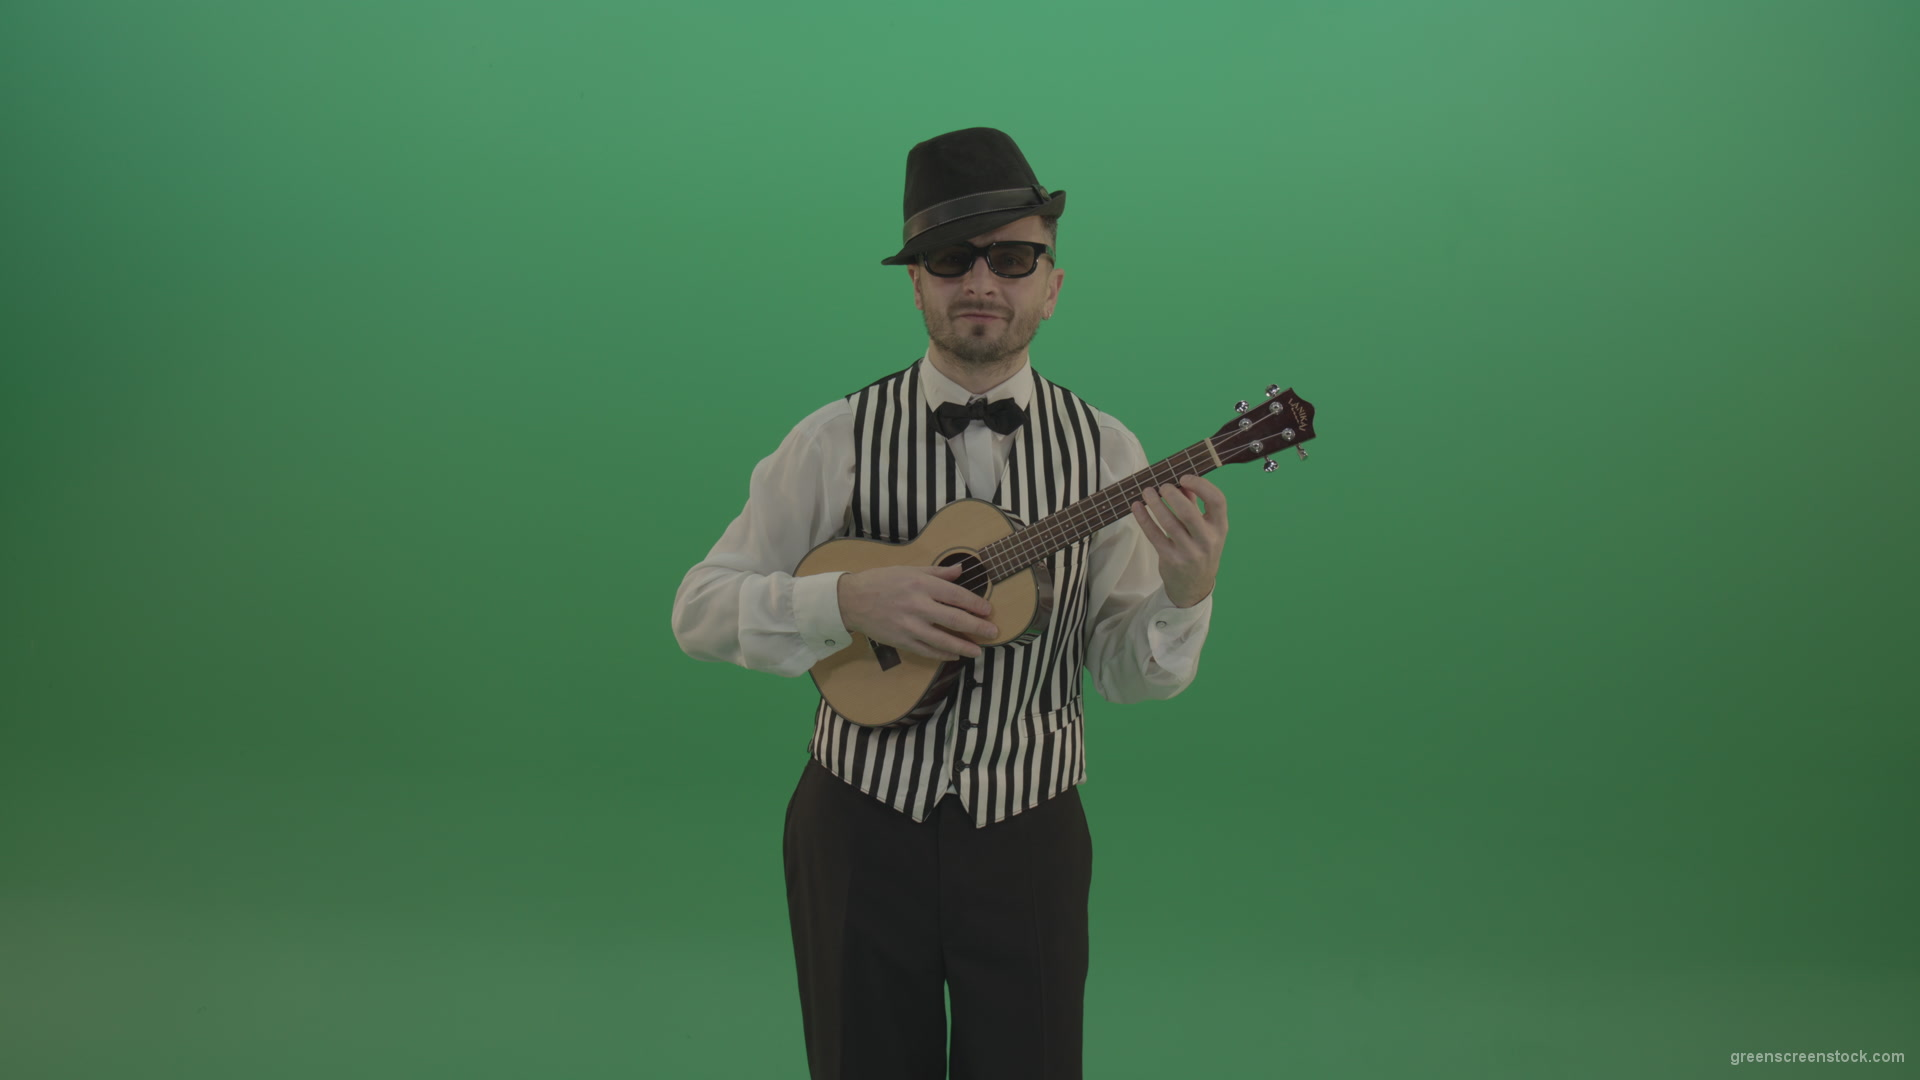 Funny-guitar-player-with-small-classic-guitar-on-chromakey-green-screen_001 Green Screen Stock